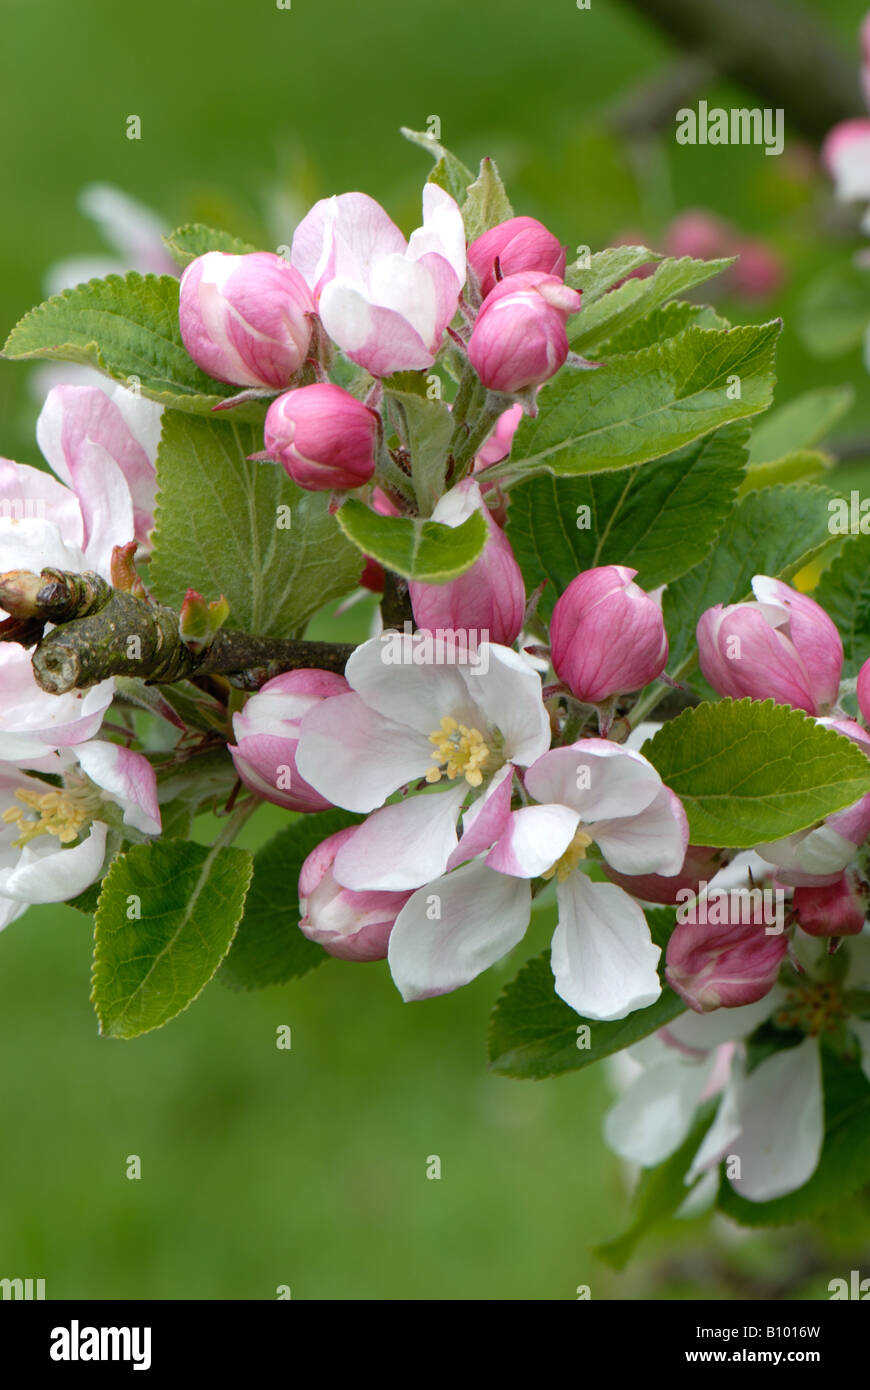 King flowers and pink buds developing on an apple tree variety Sunset Stock Photo